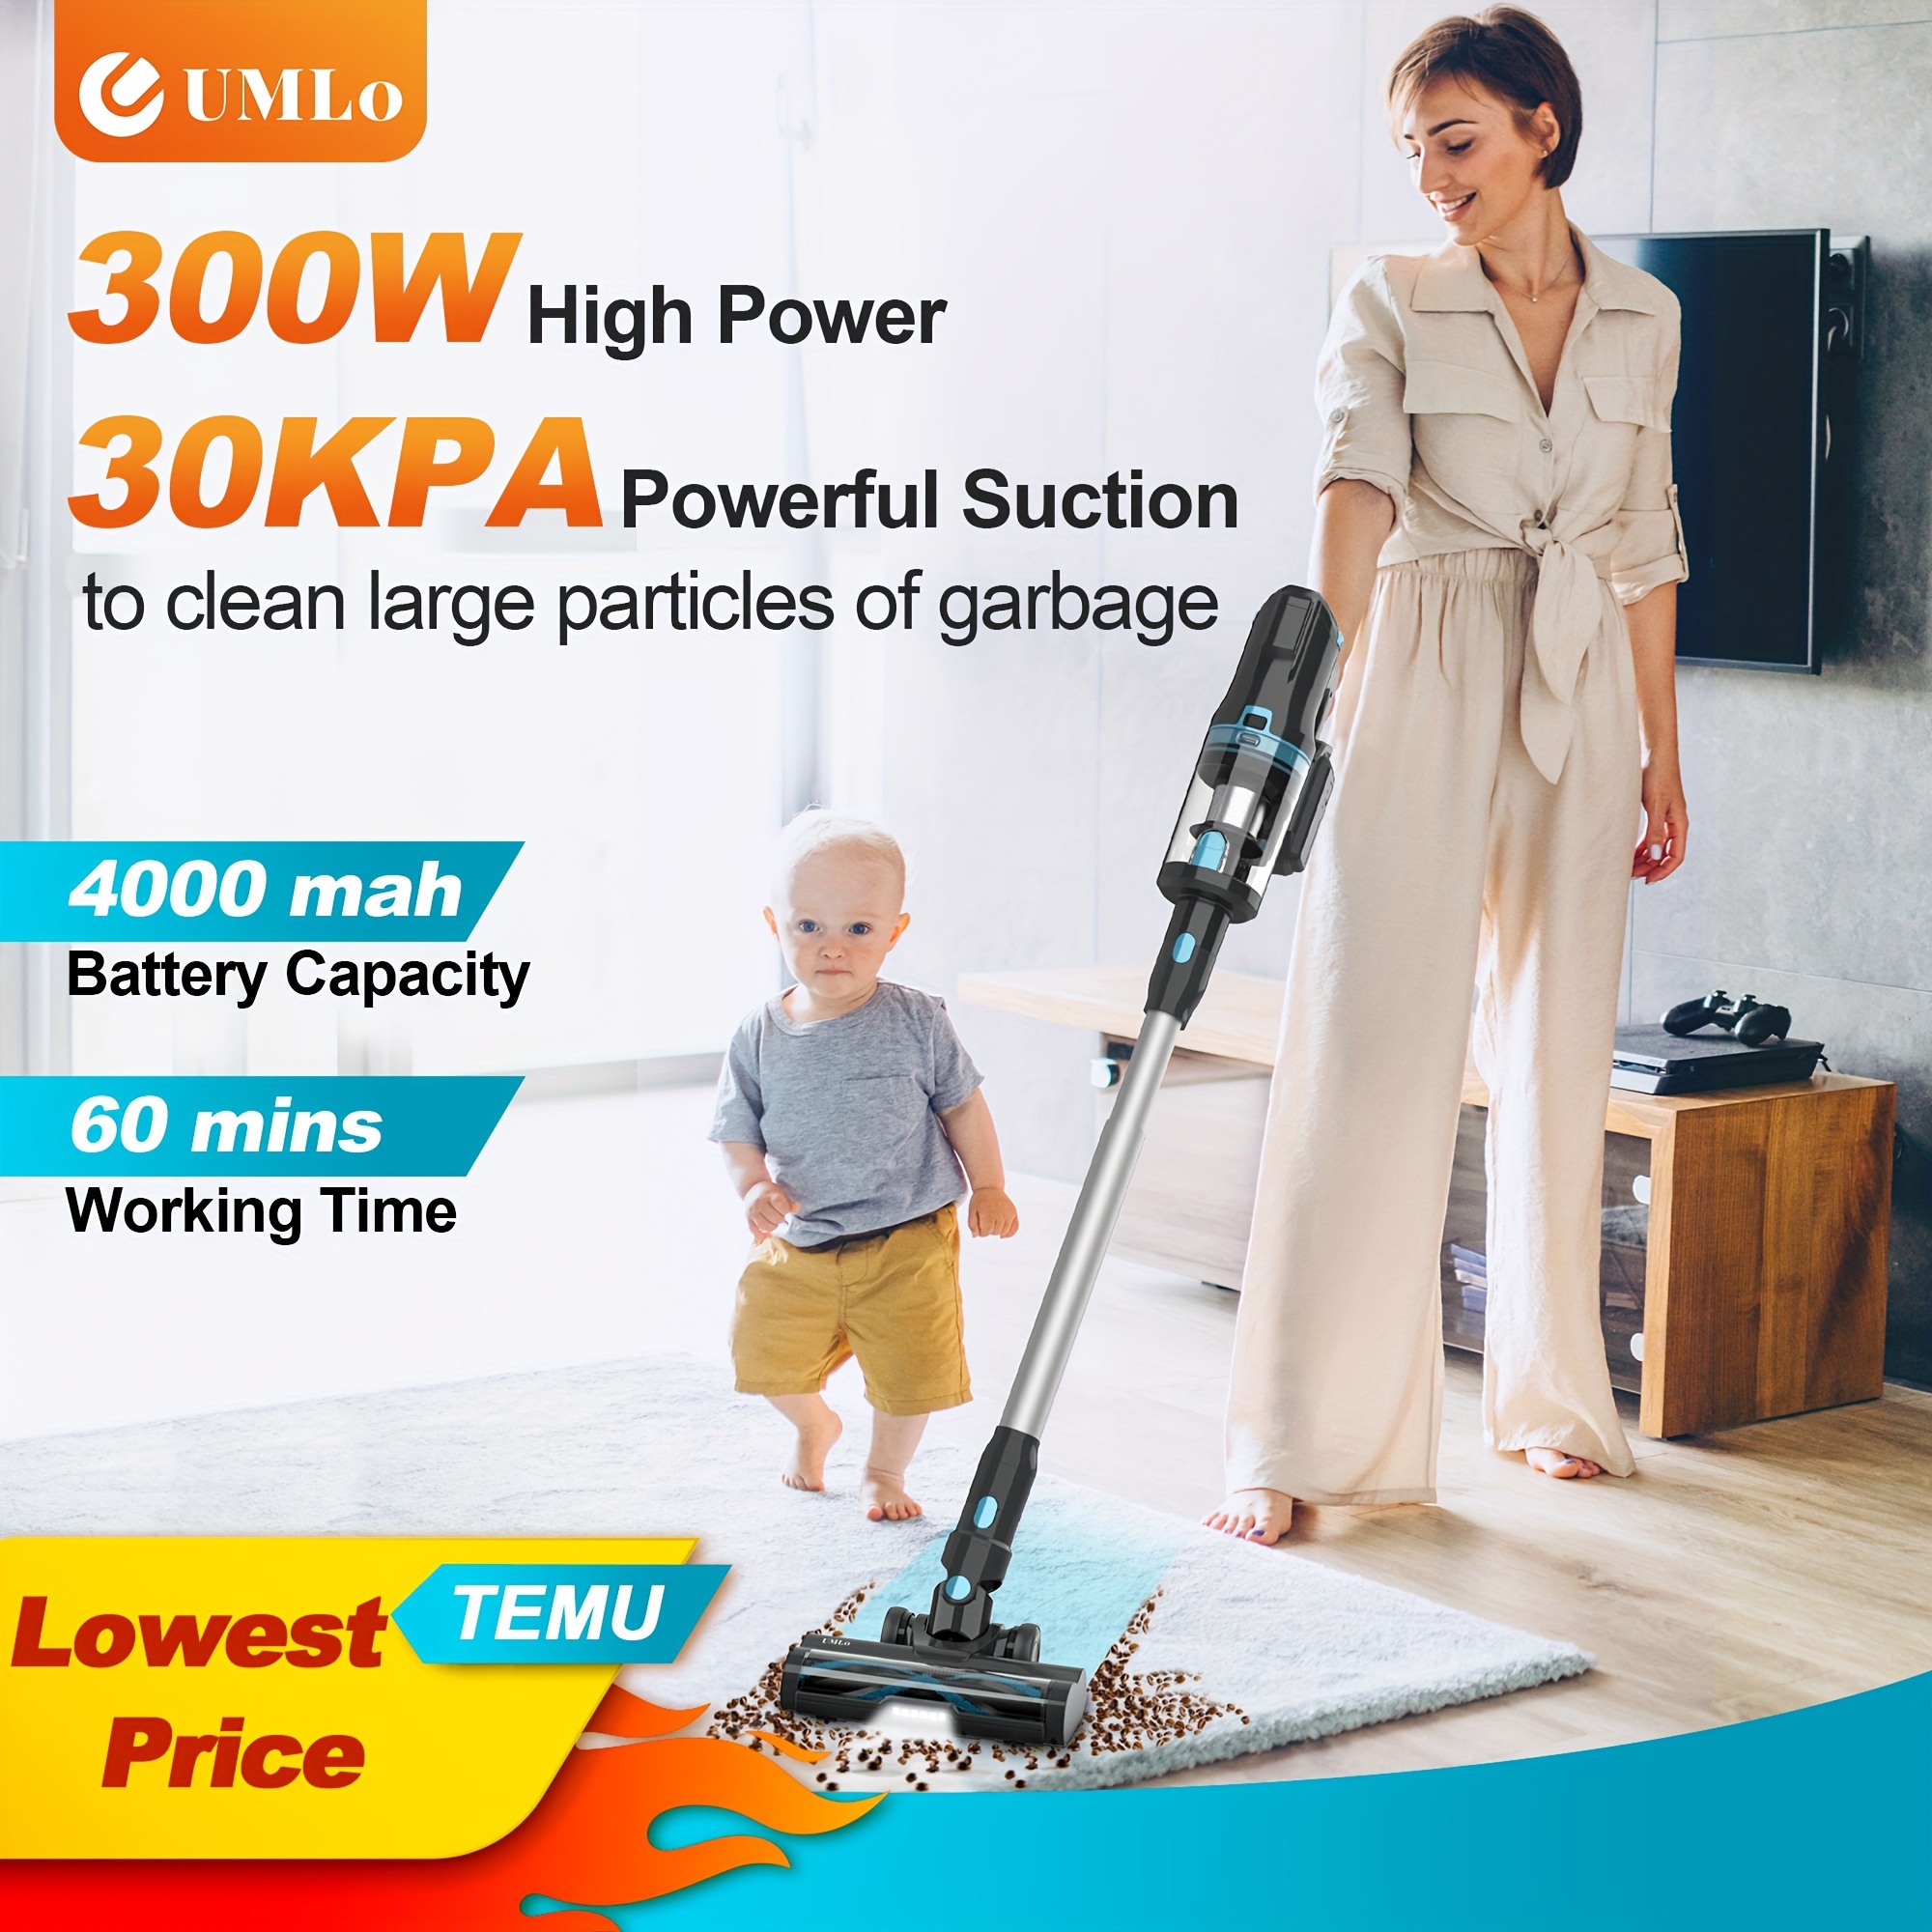 

Umlo V11 Cordless Vacuum Cleaner, Stick Vacuum With 300w 30kpa, 4000mah Rechargeable Battery Vacuum, Up To 60min Runtime, Powerful Suction, 8 In 1 Led Lightweight Vacuum For Pet Hair Carpet Hard Floor